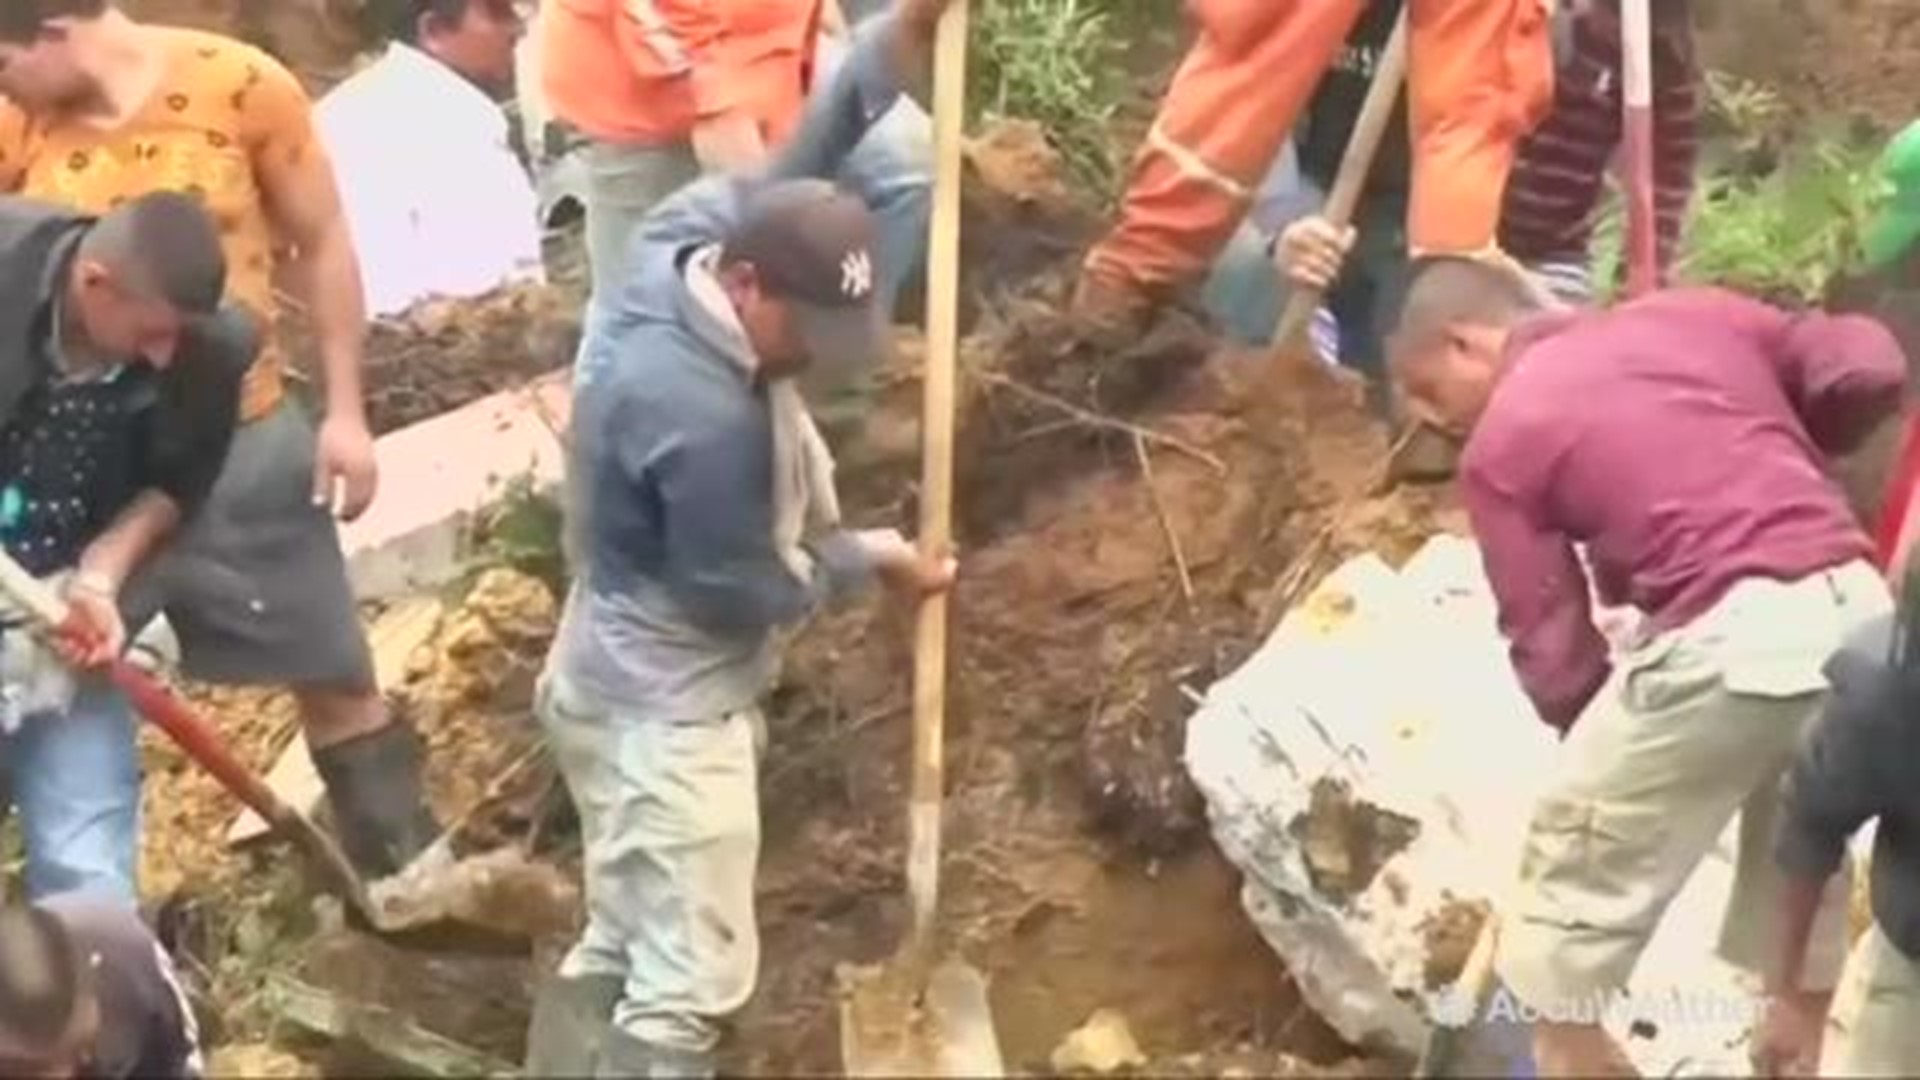 Disaster officials in Colombia say at least 12 people including 4 children have been killed following a mudslide in the town of Marquetalia. The mudslide began at about 2 a.m. local time on October 11, following torrential rains while residents in the are